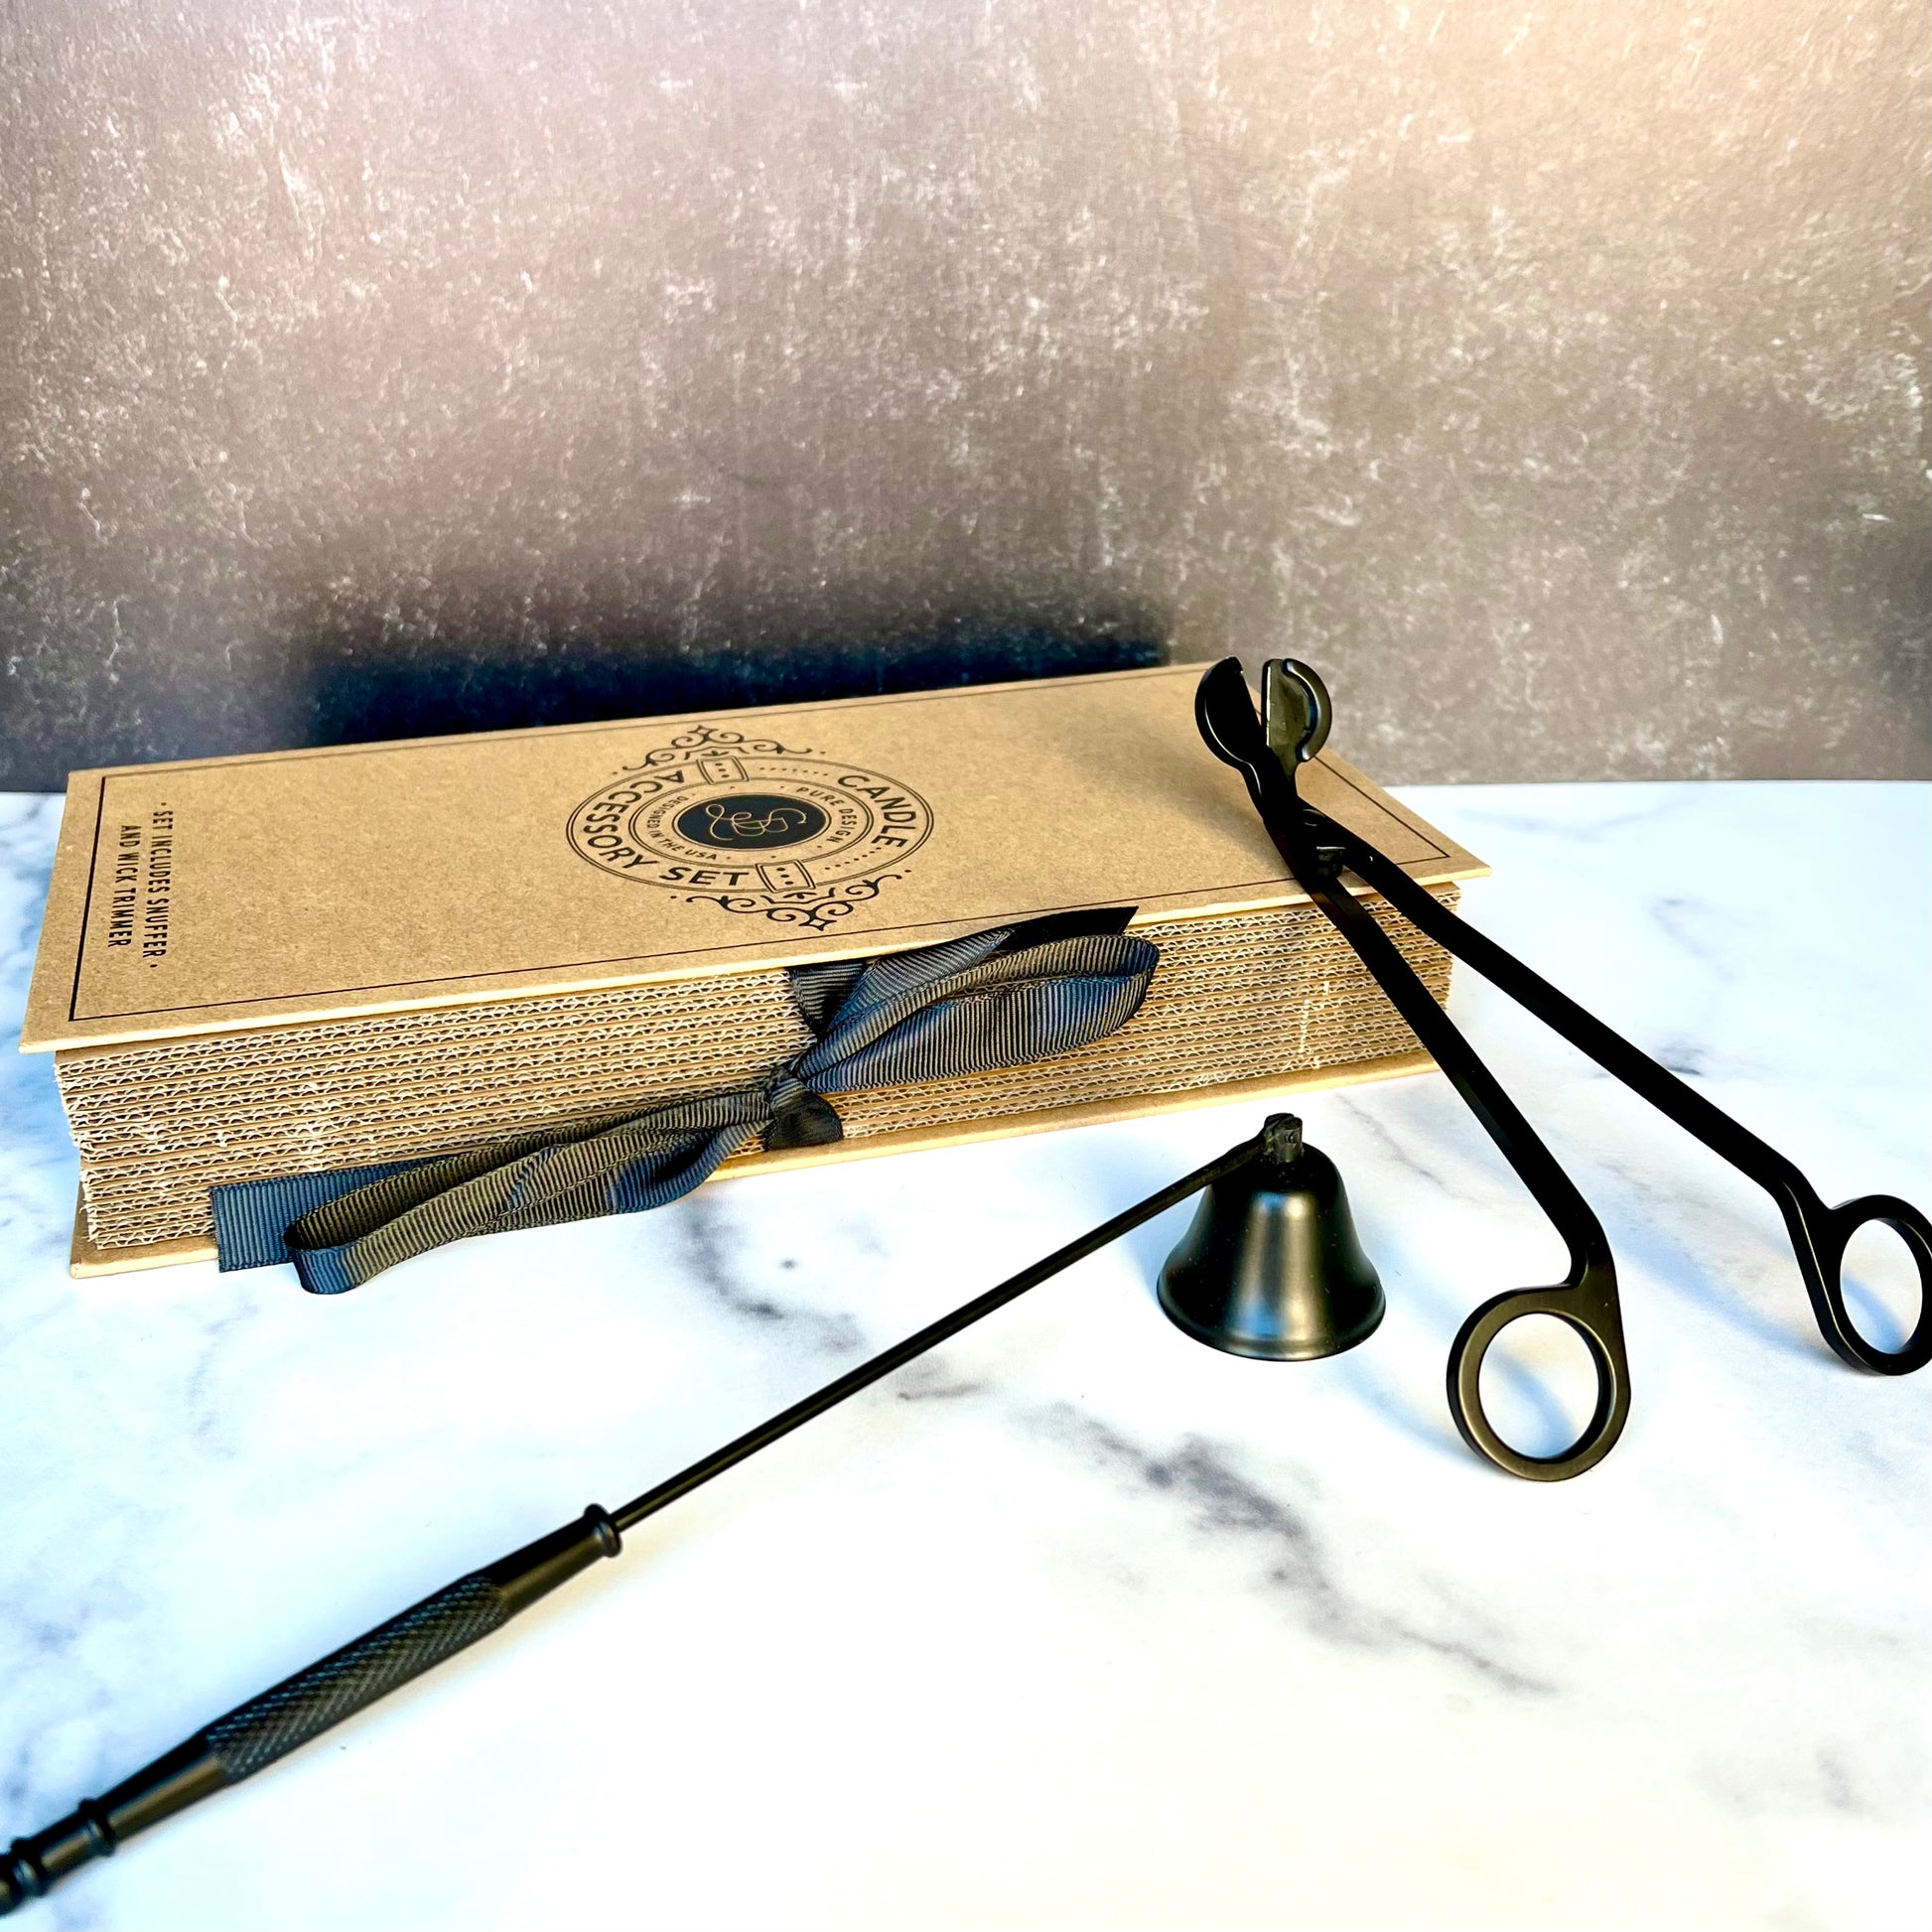 The Candle Snuffer & Wick Trimmer sitting on a table with the box they come in behind